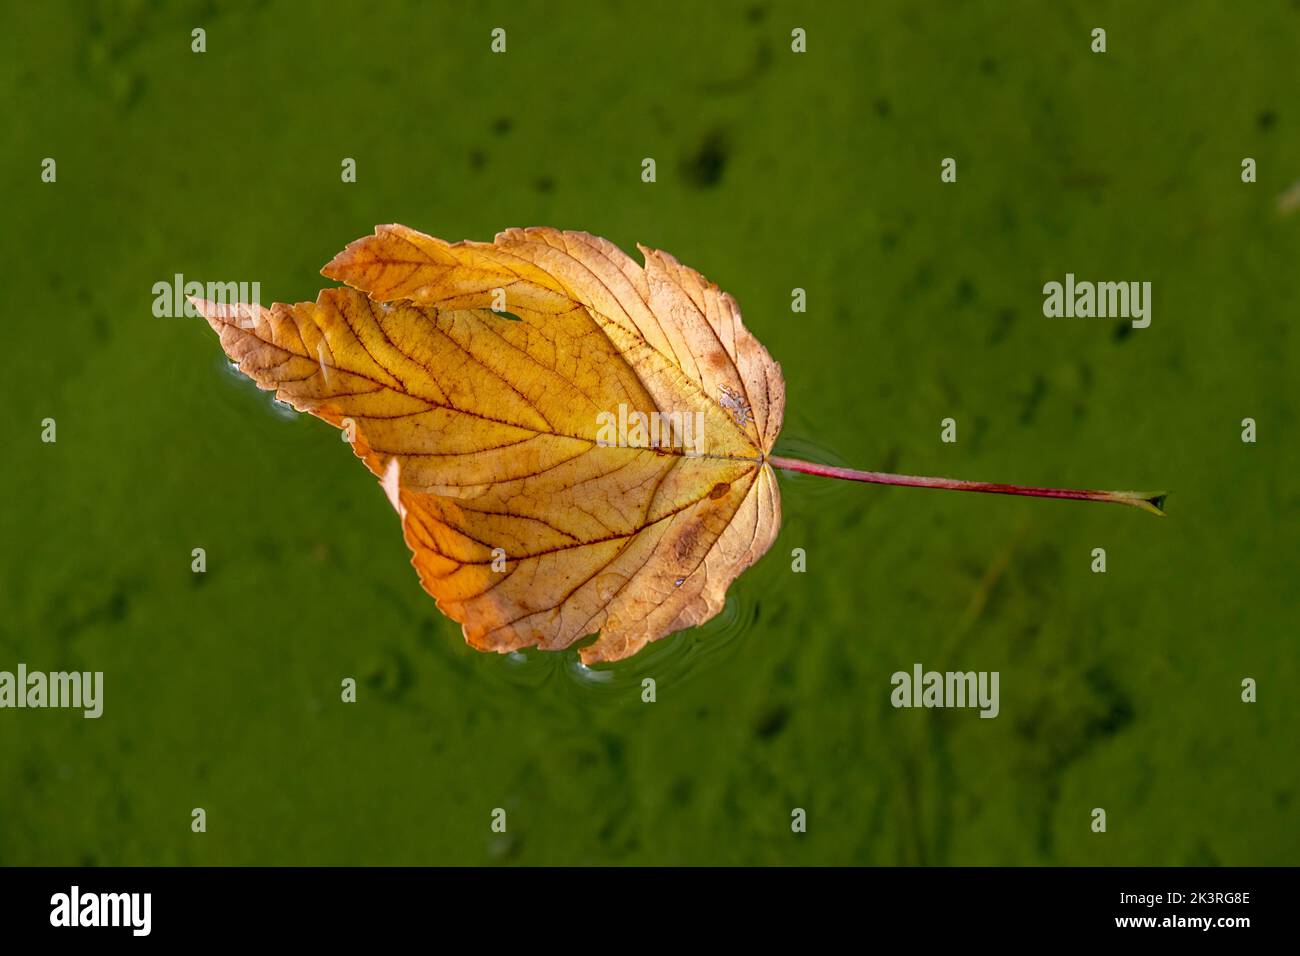 Sycamore Maple.  Acer pseudoplatanus  leaf curled up floating on water with copyspace, Abington Park, Boating lake, Northampton, UK. Stock Photo